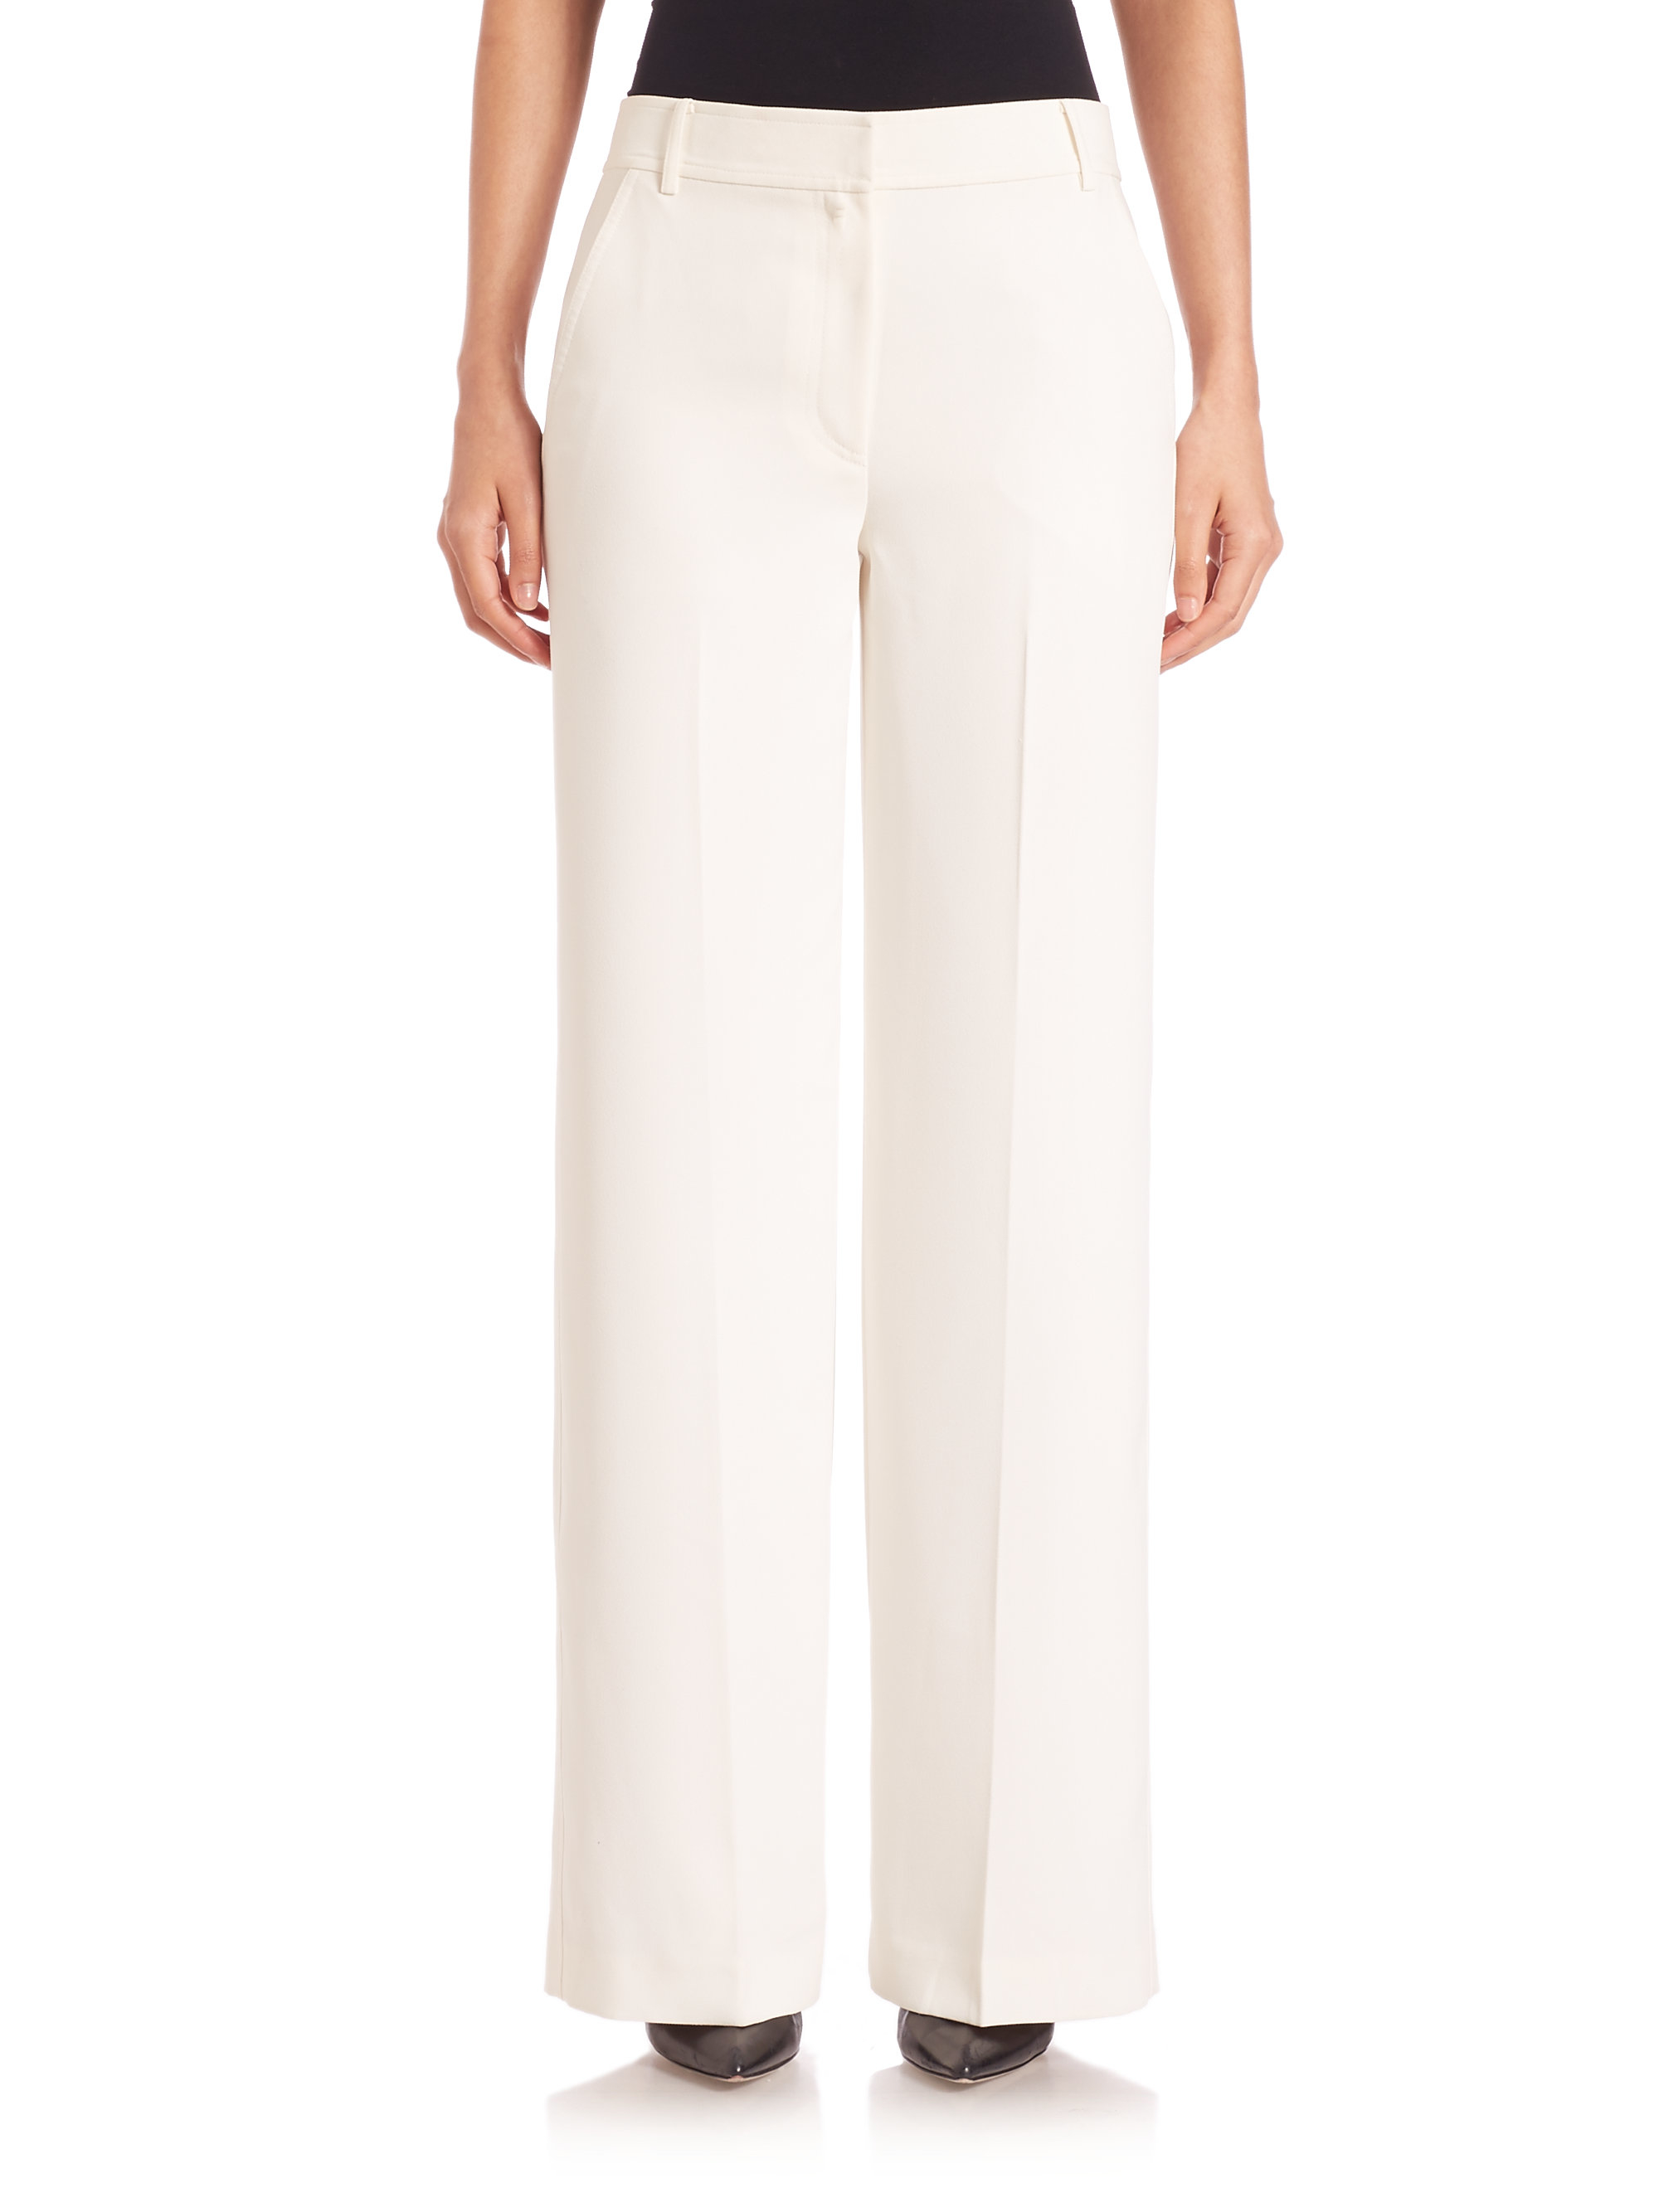 T by alexander wang Polyester Crepe Wide Leg Pants in Natural | Lyst